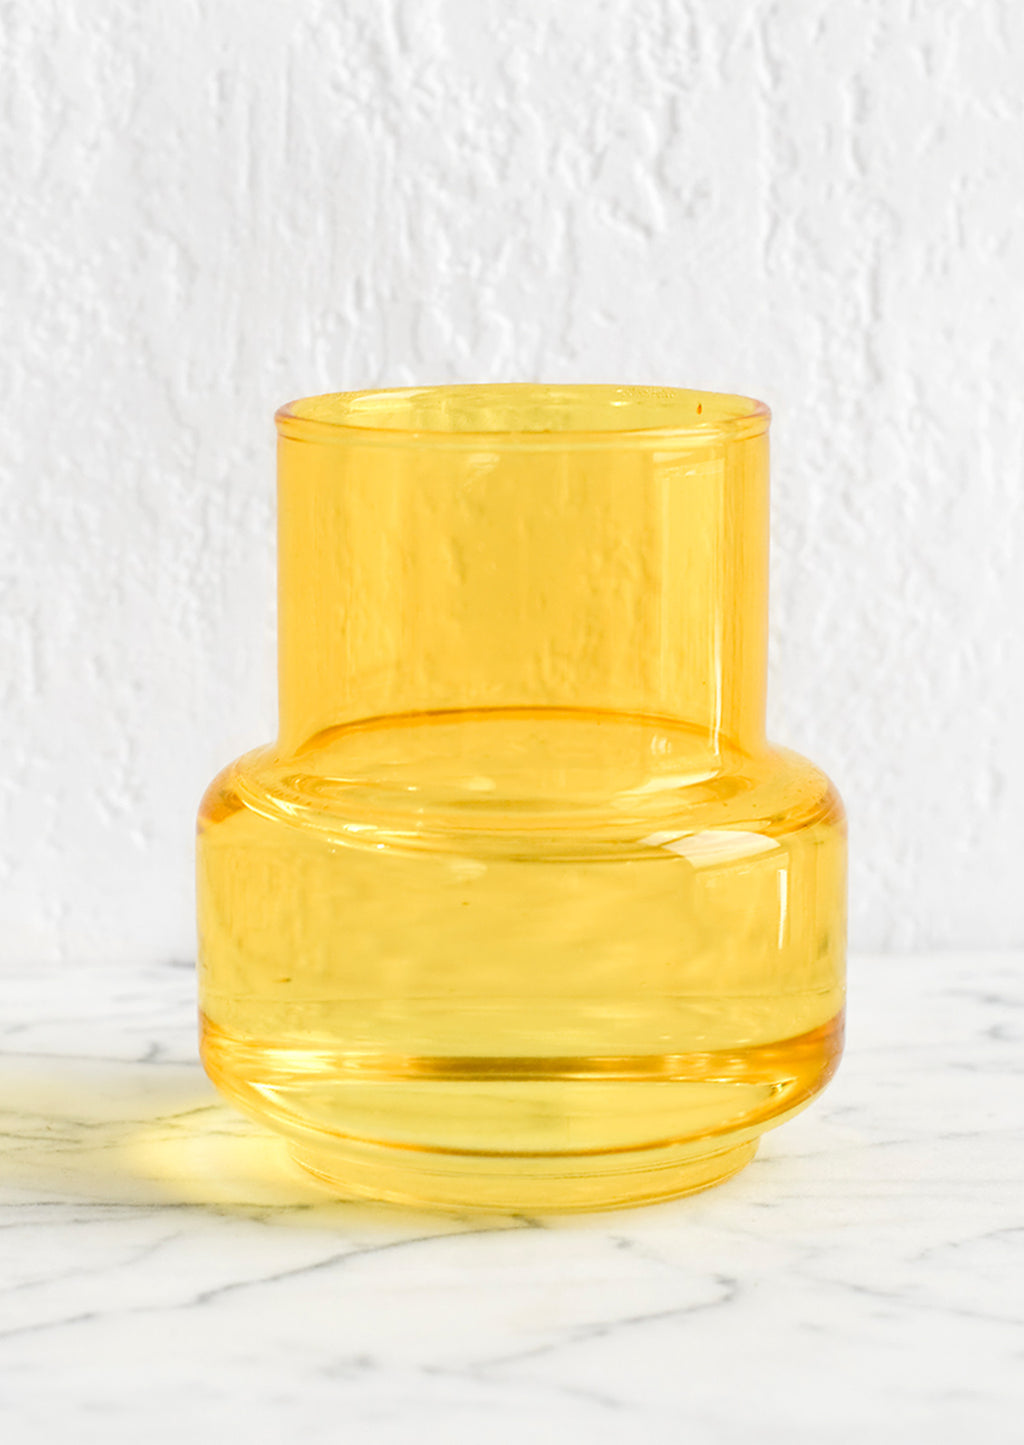 2: A small yellow glass vase.